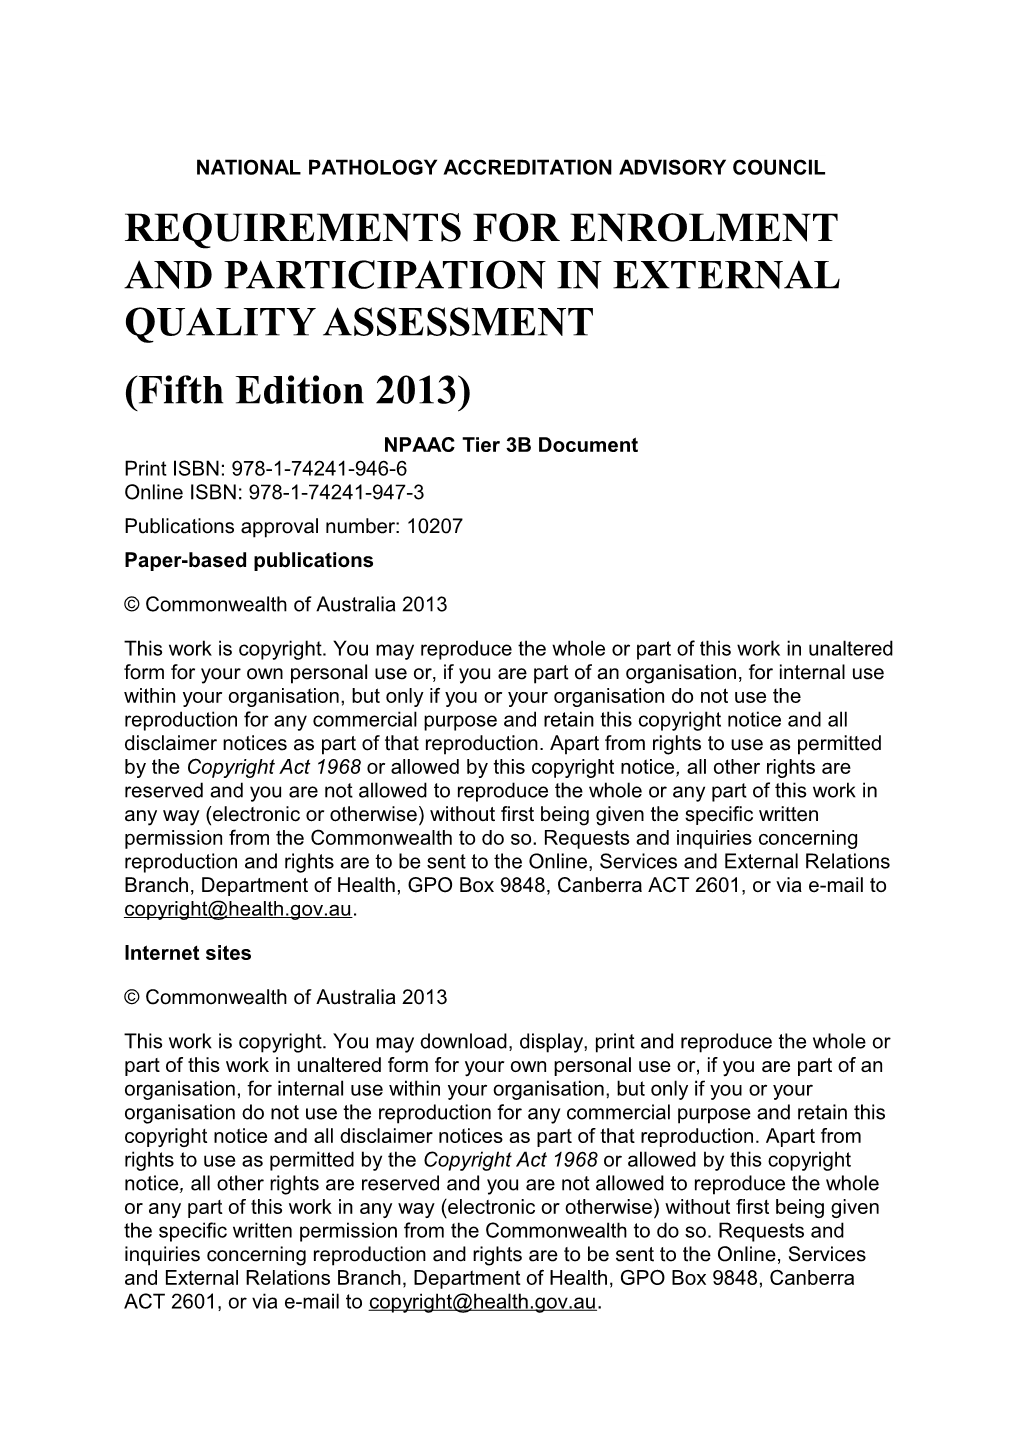 Requirements for Enrolment and Participation in External Quality Assessment